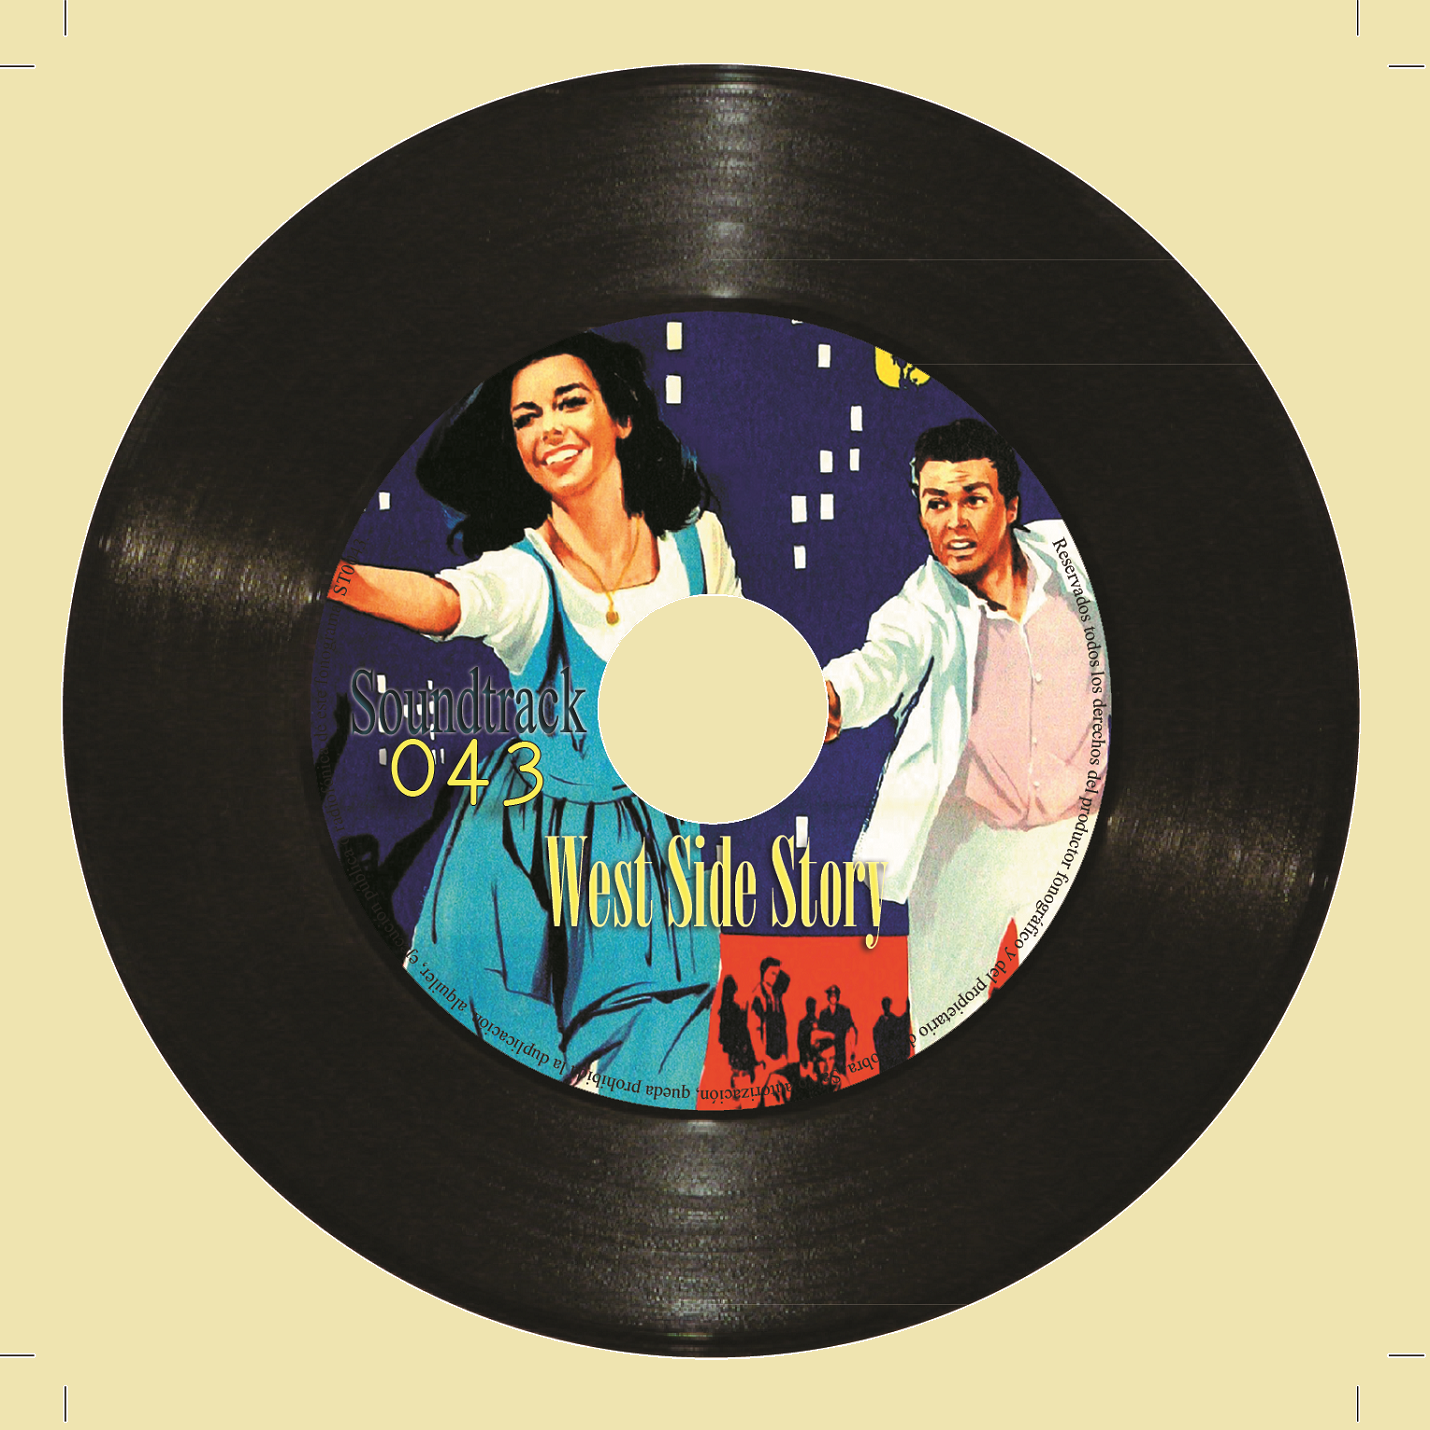 West Side Story (Colección Soundtrack - #43)